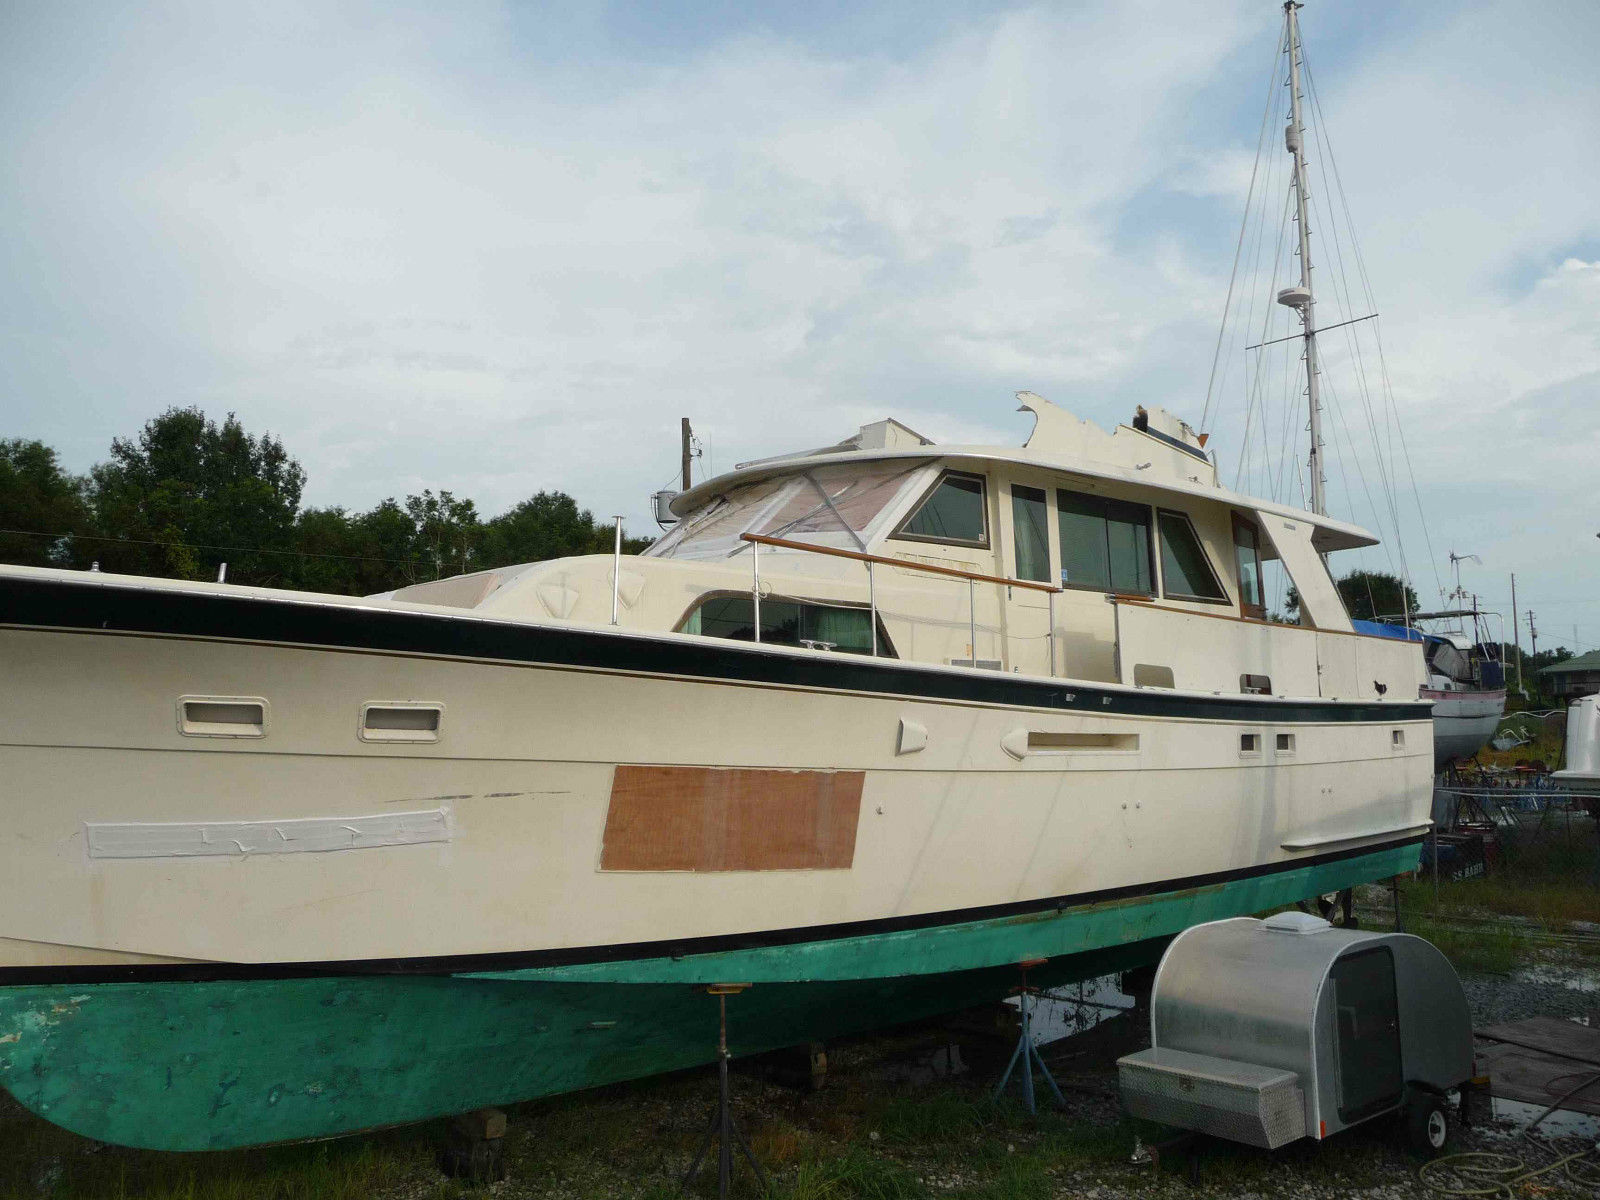 hatteras 53 motor yacht for sale